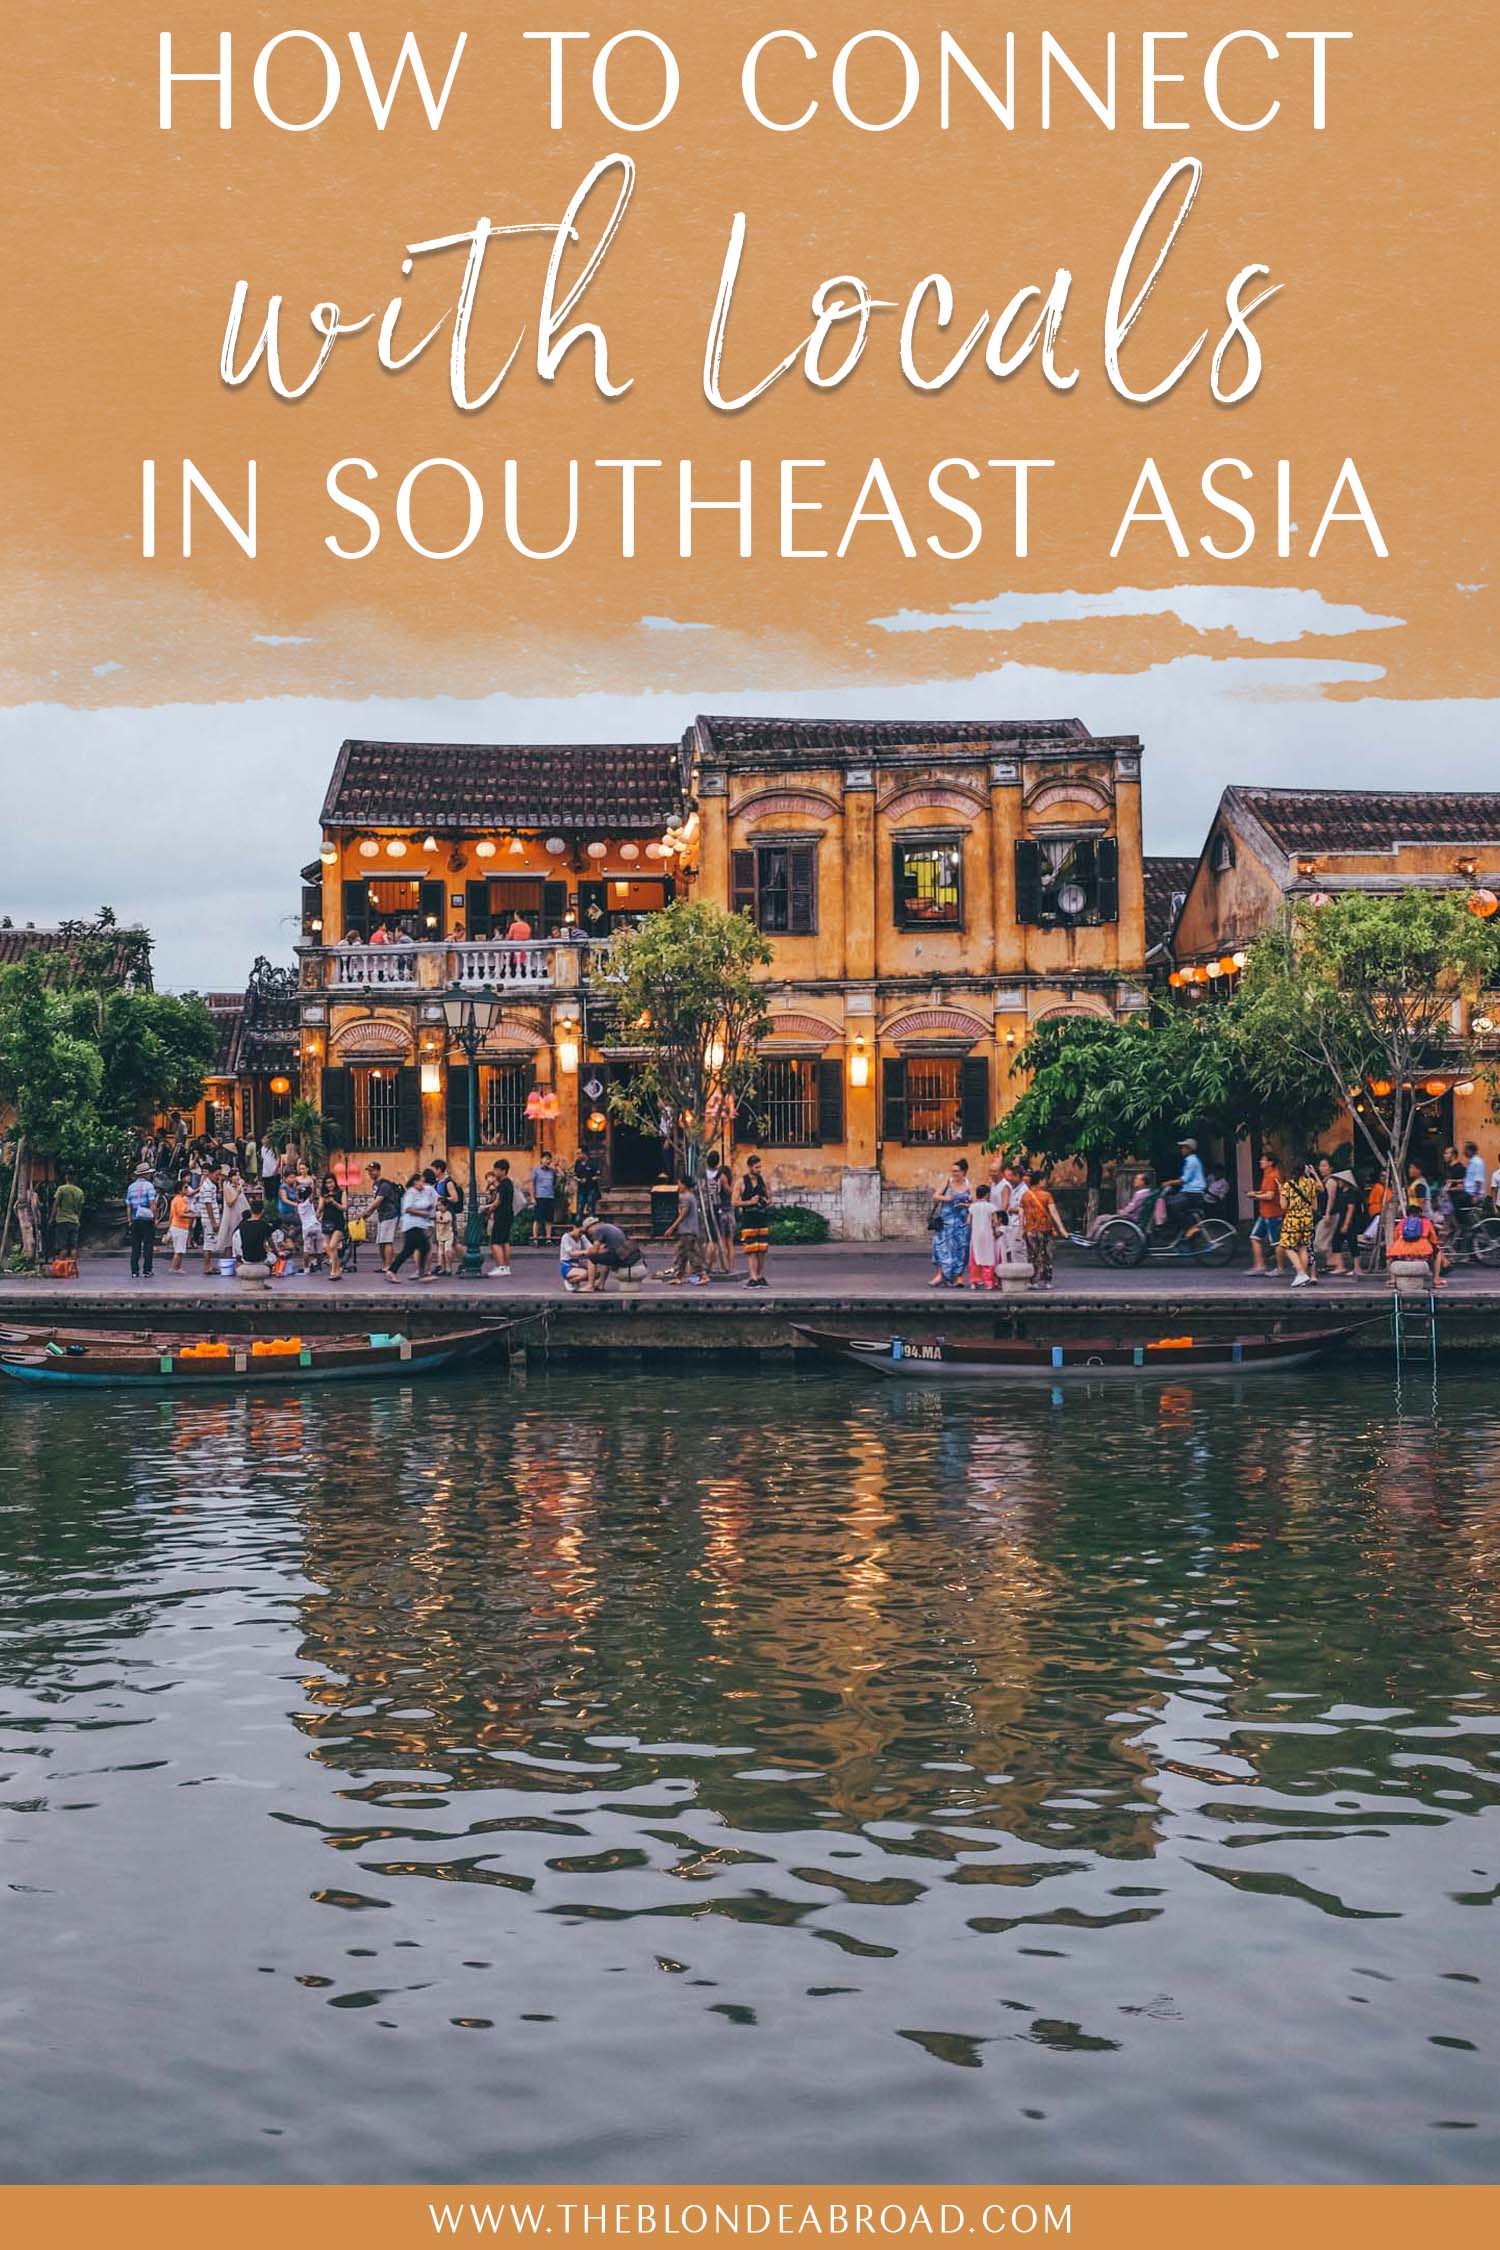 Connect with Locals Southeast Asia